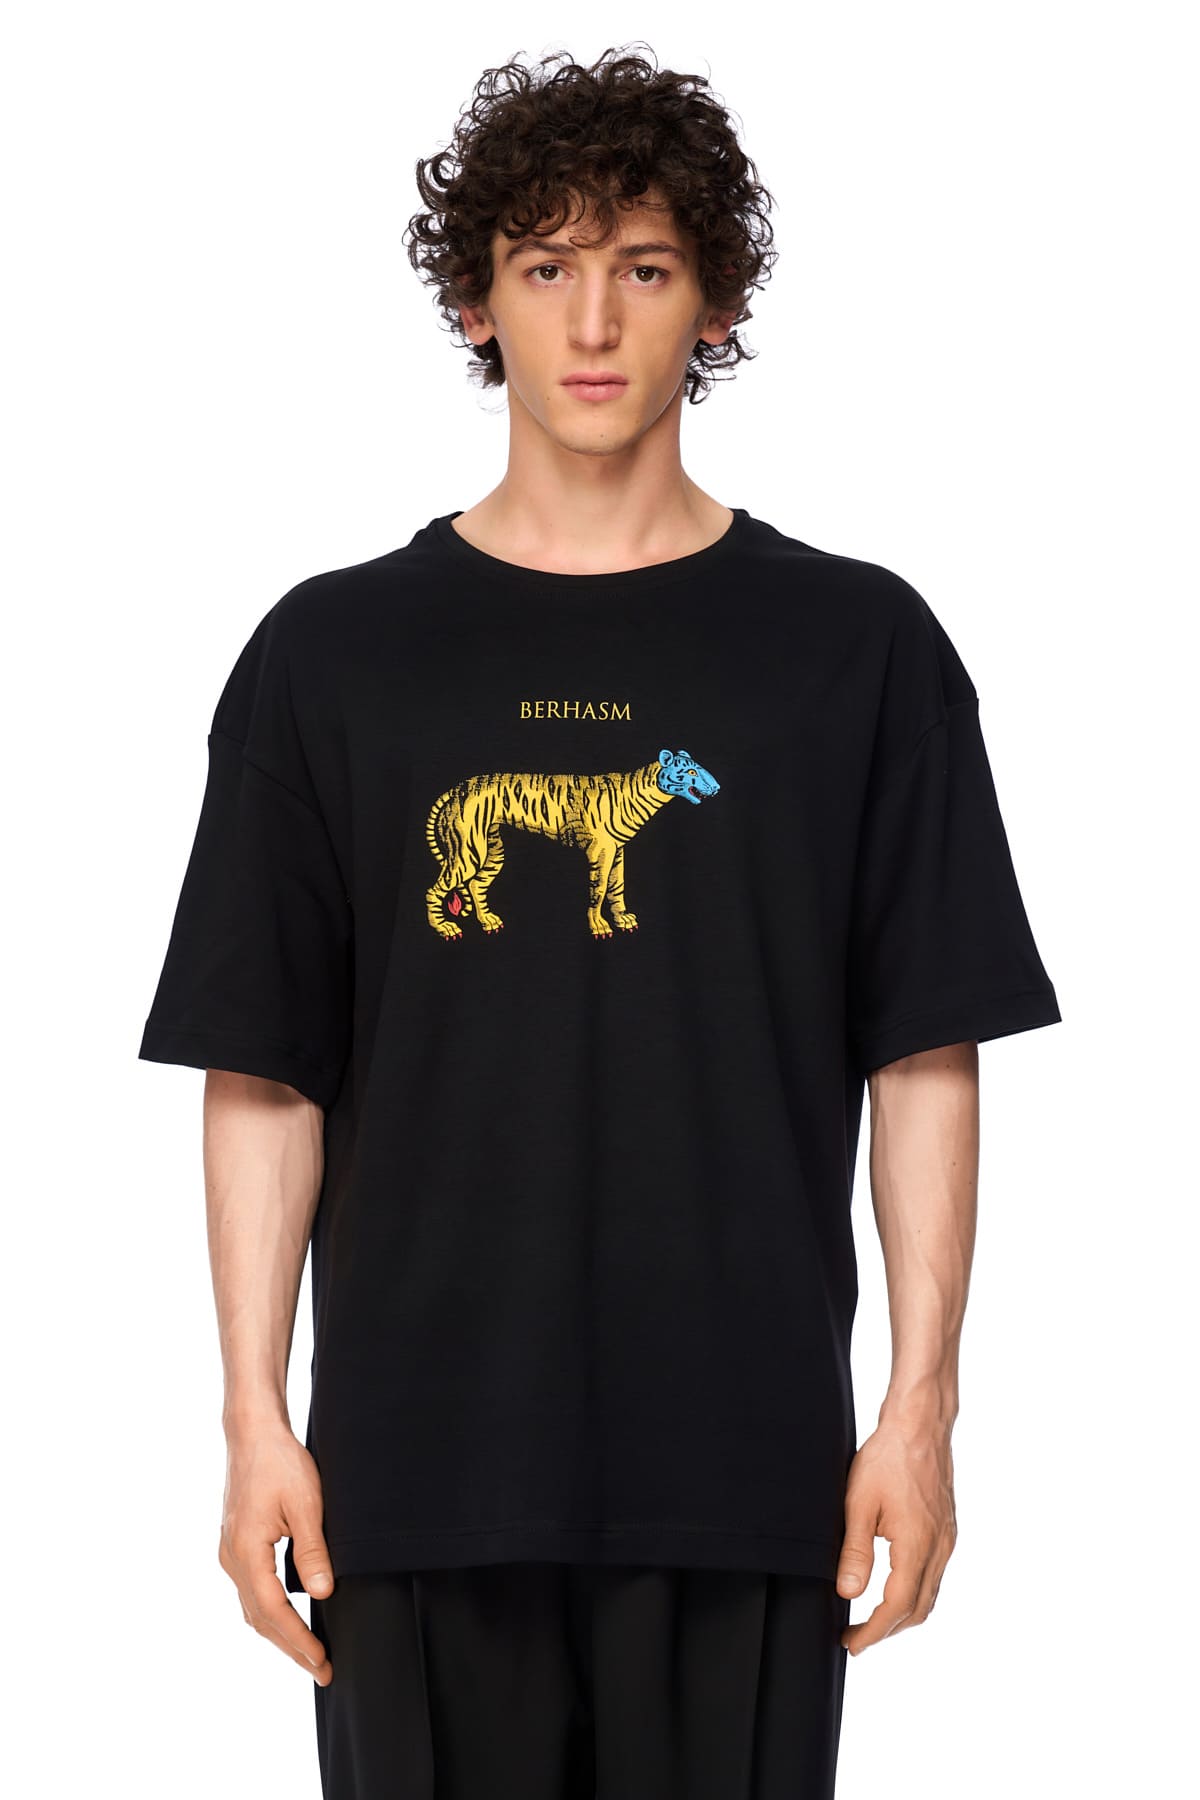 Party in the Zoo T-shirt